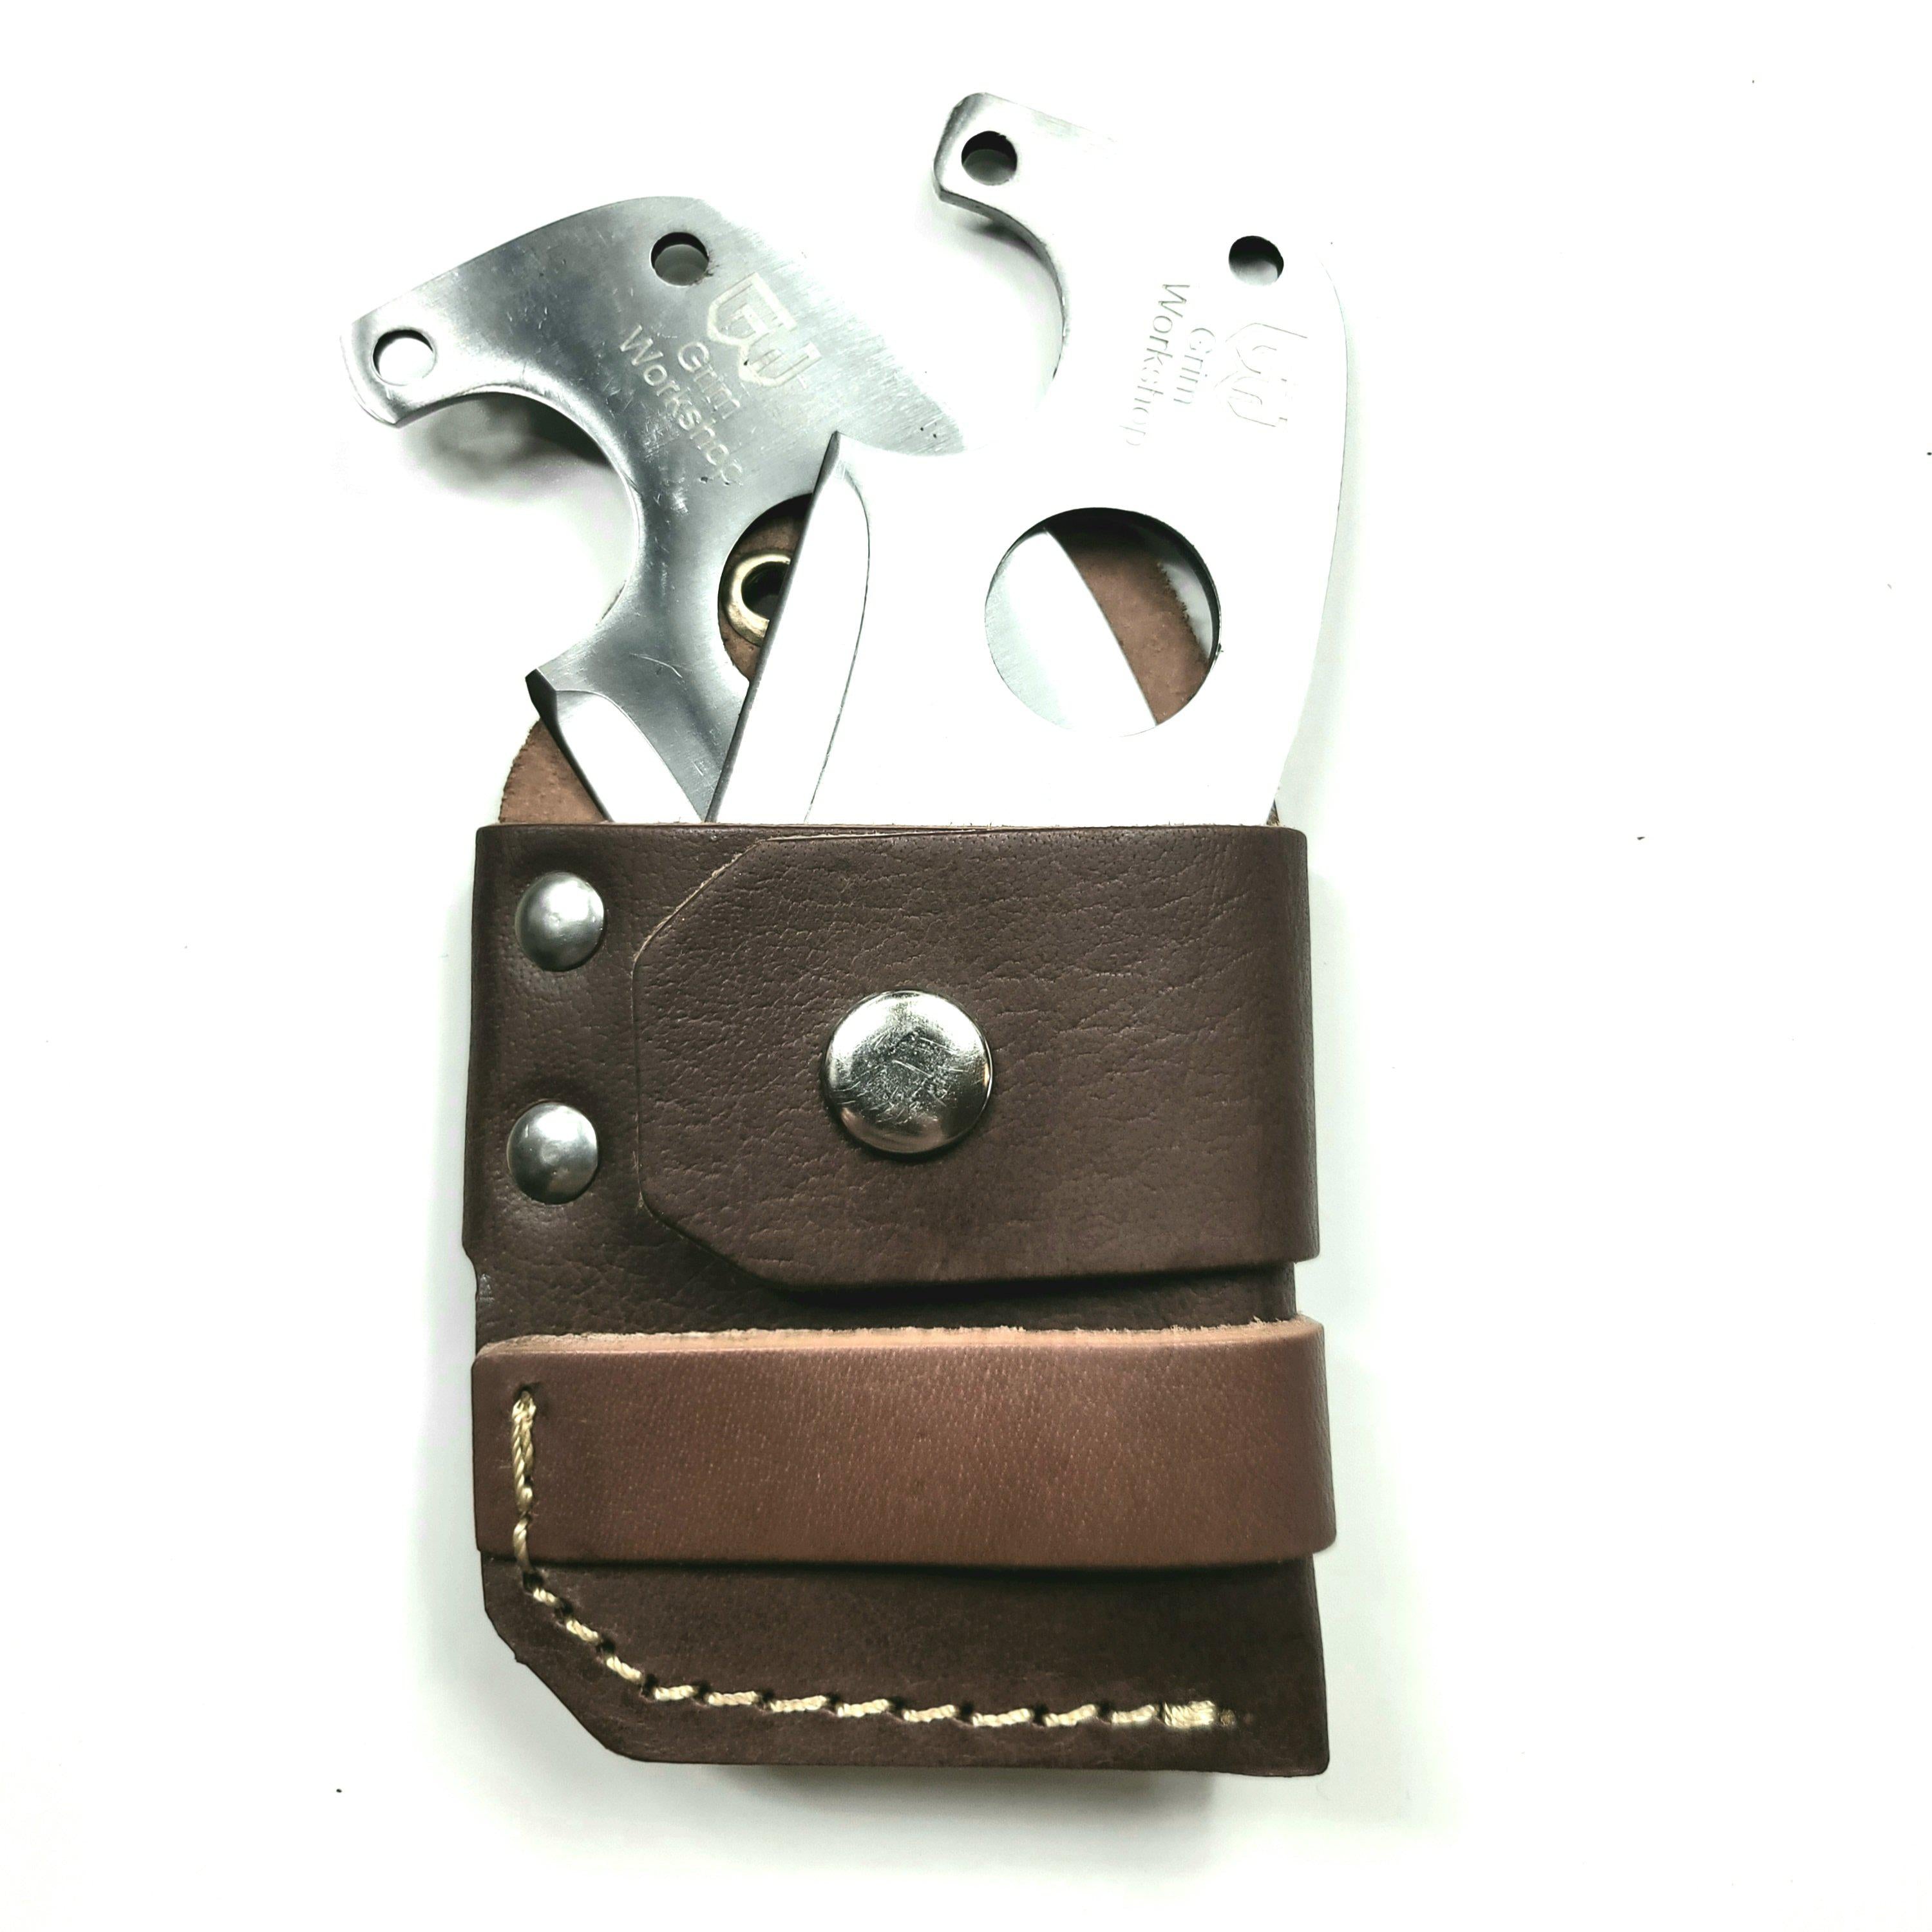 Axe and Adze Card Tool Sheath-Grimworkshop-bugoutbag-bushcraft-edc-gear-edctool-everydaycarry-survivalcard-survivalkit-wilderness-prepping-toolkit